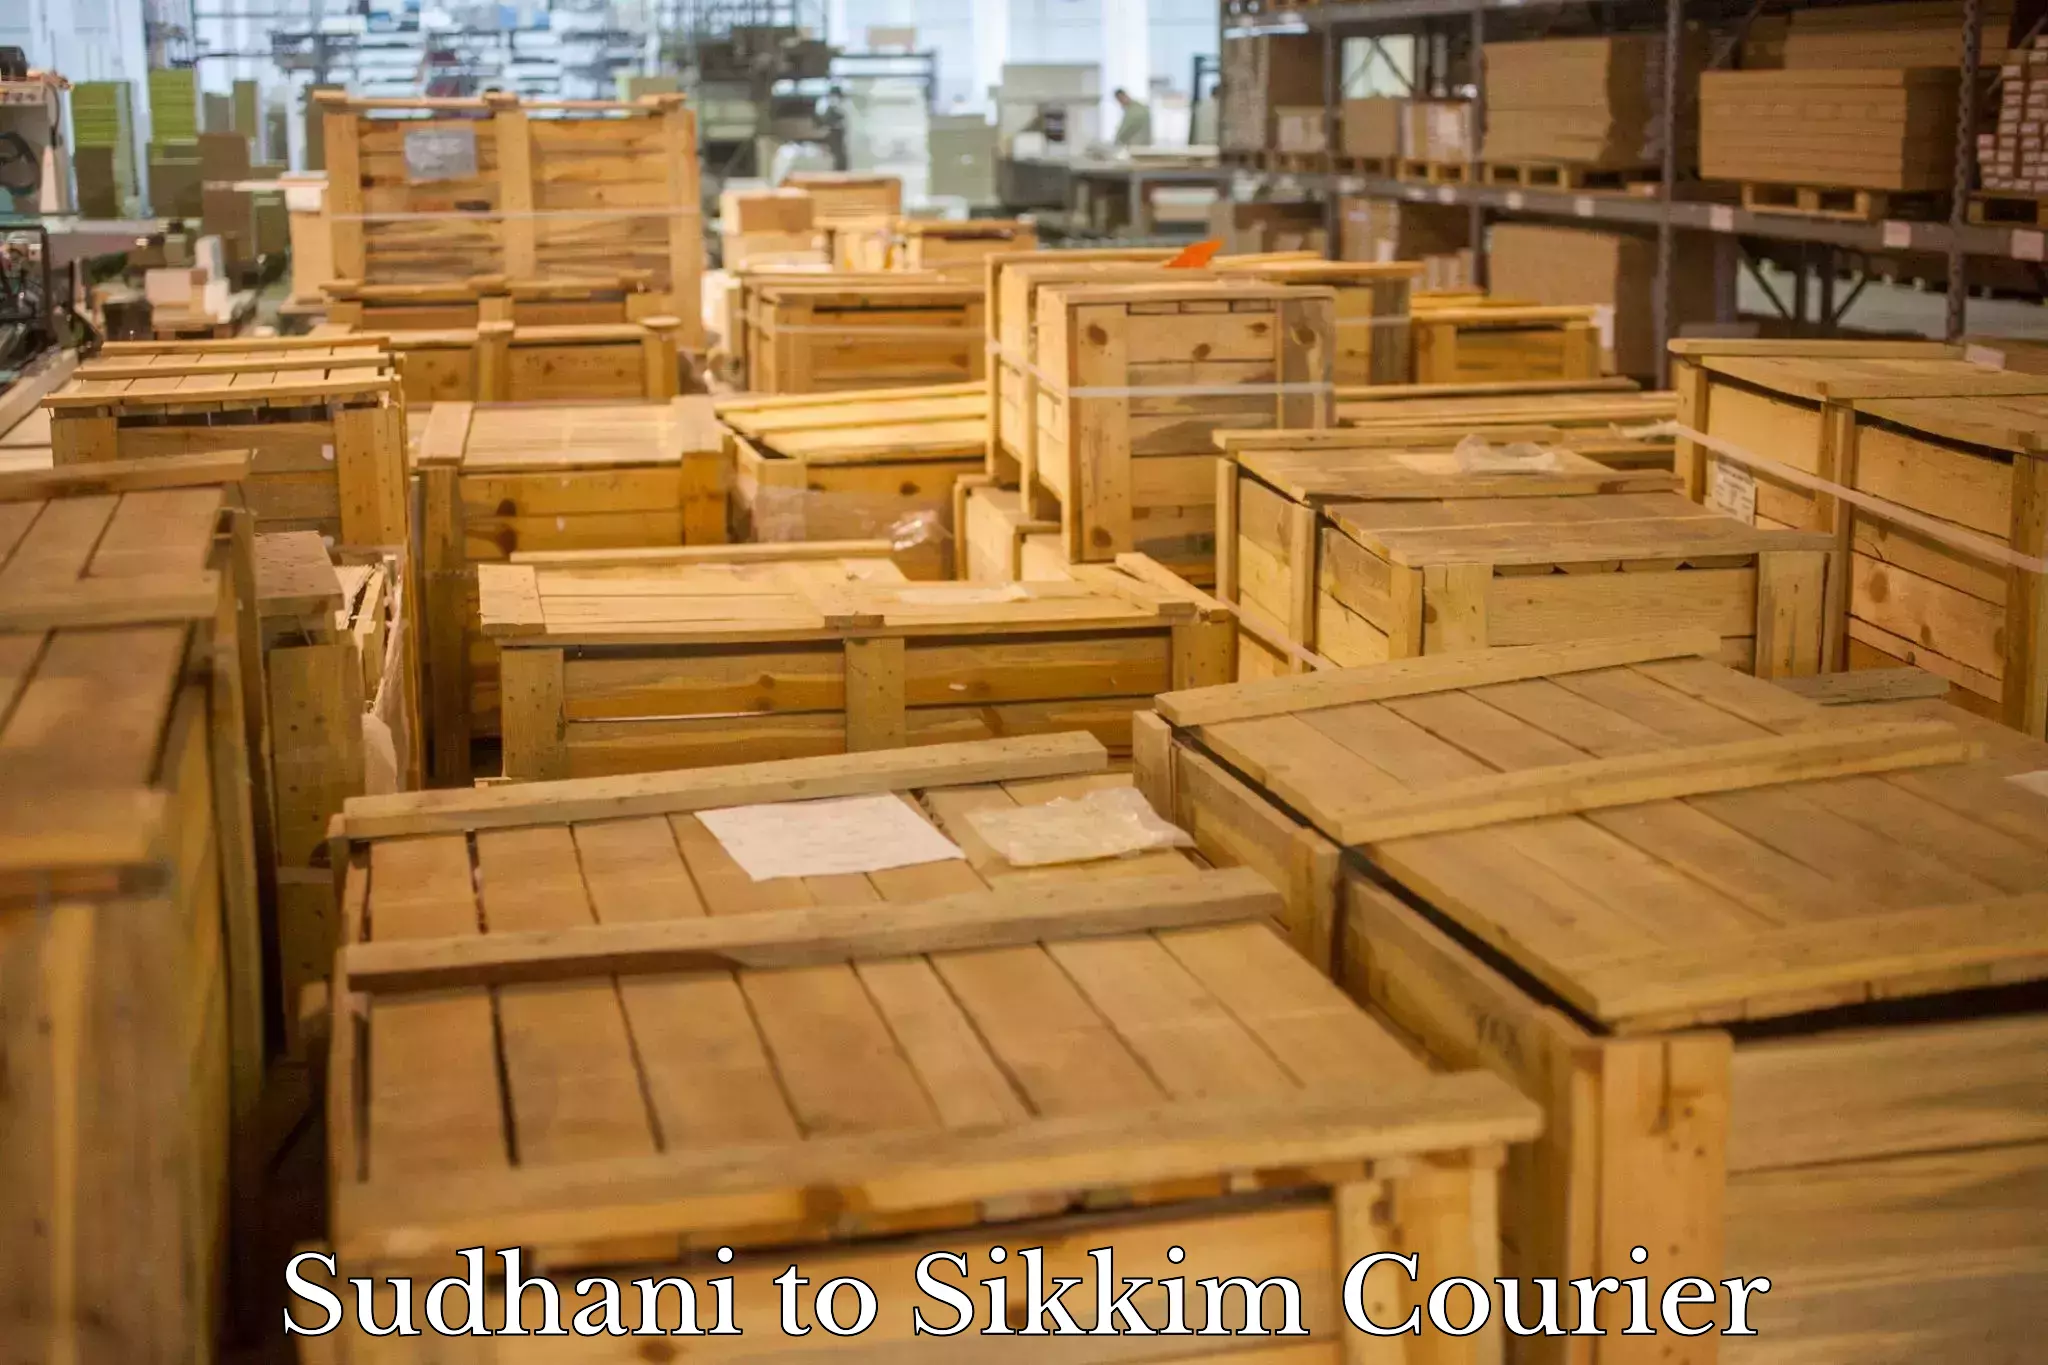 Easy access courier services Sudhani to Pelling